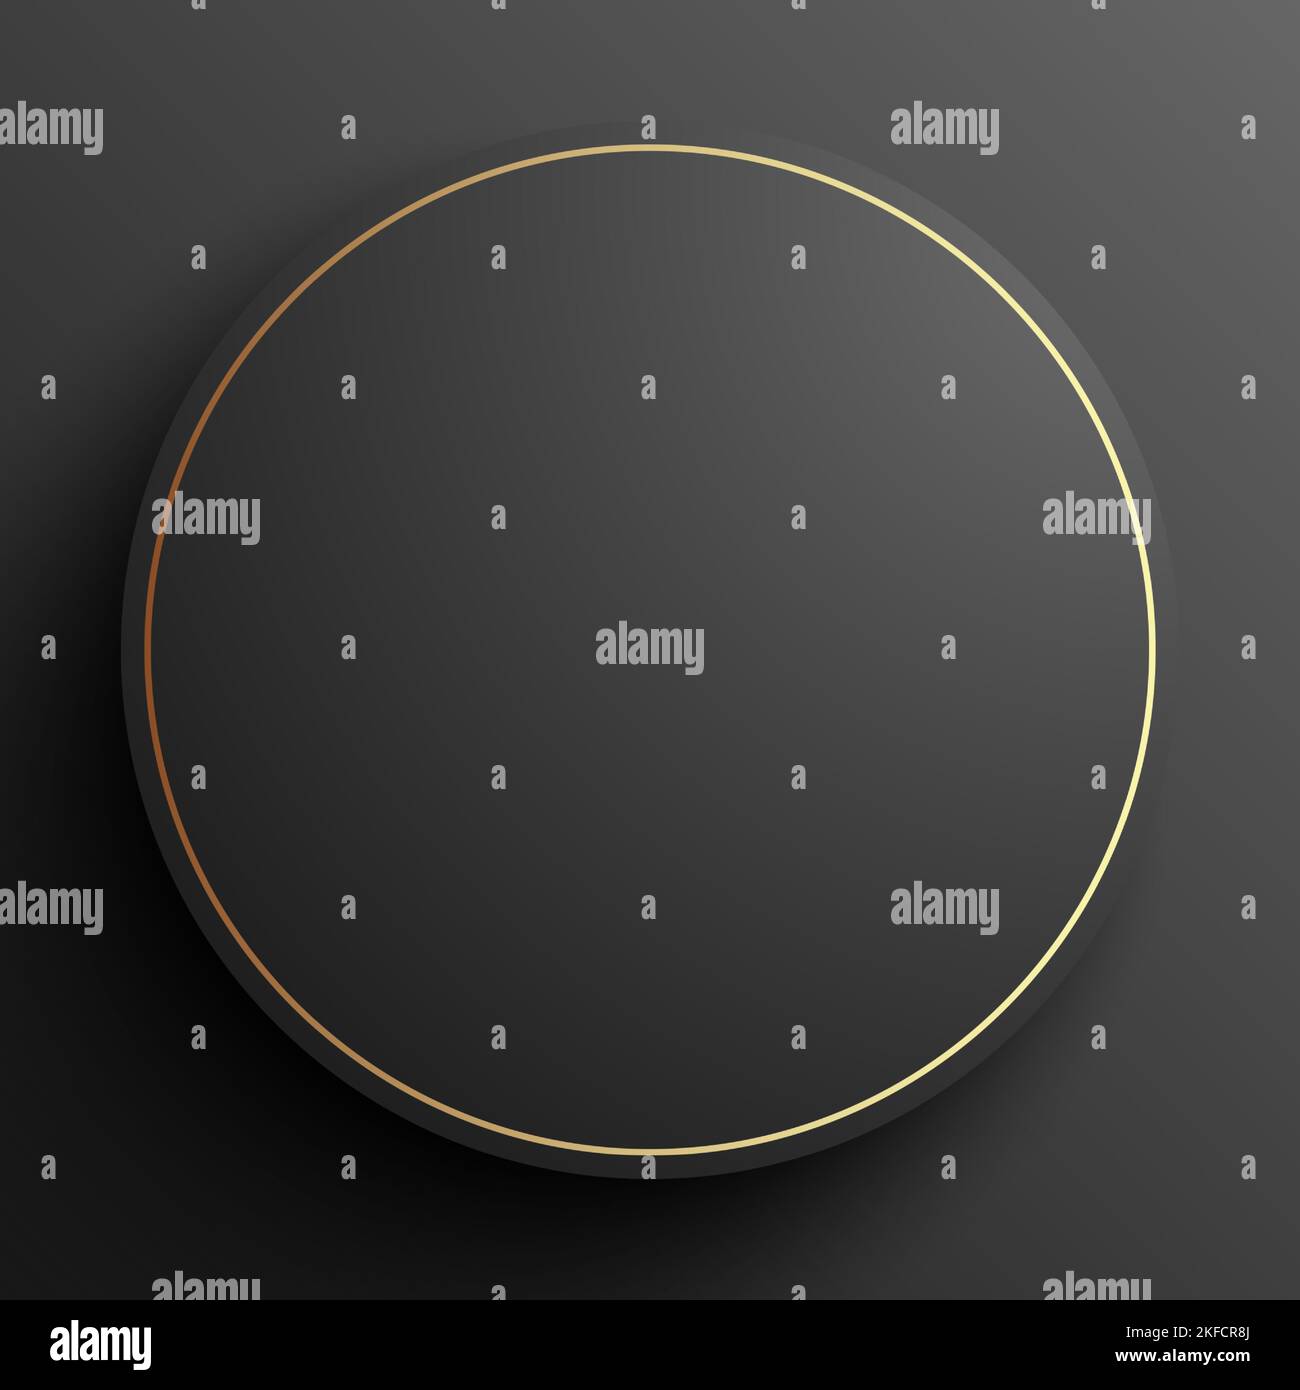 https://c8.alamy.com/comp/2KFCR8J/black-premium-looking-circle-shape-background-with-golden-contour-abstract-luxury-vector-banner-with-copy-space-2KFCR8J.jpg